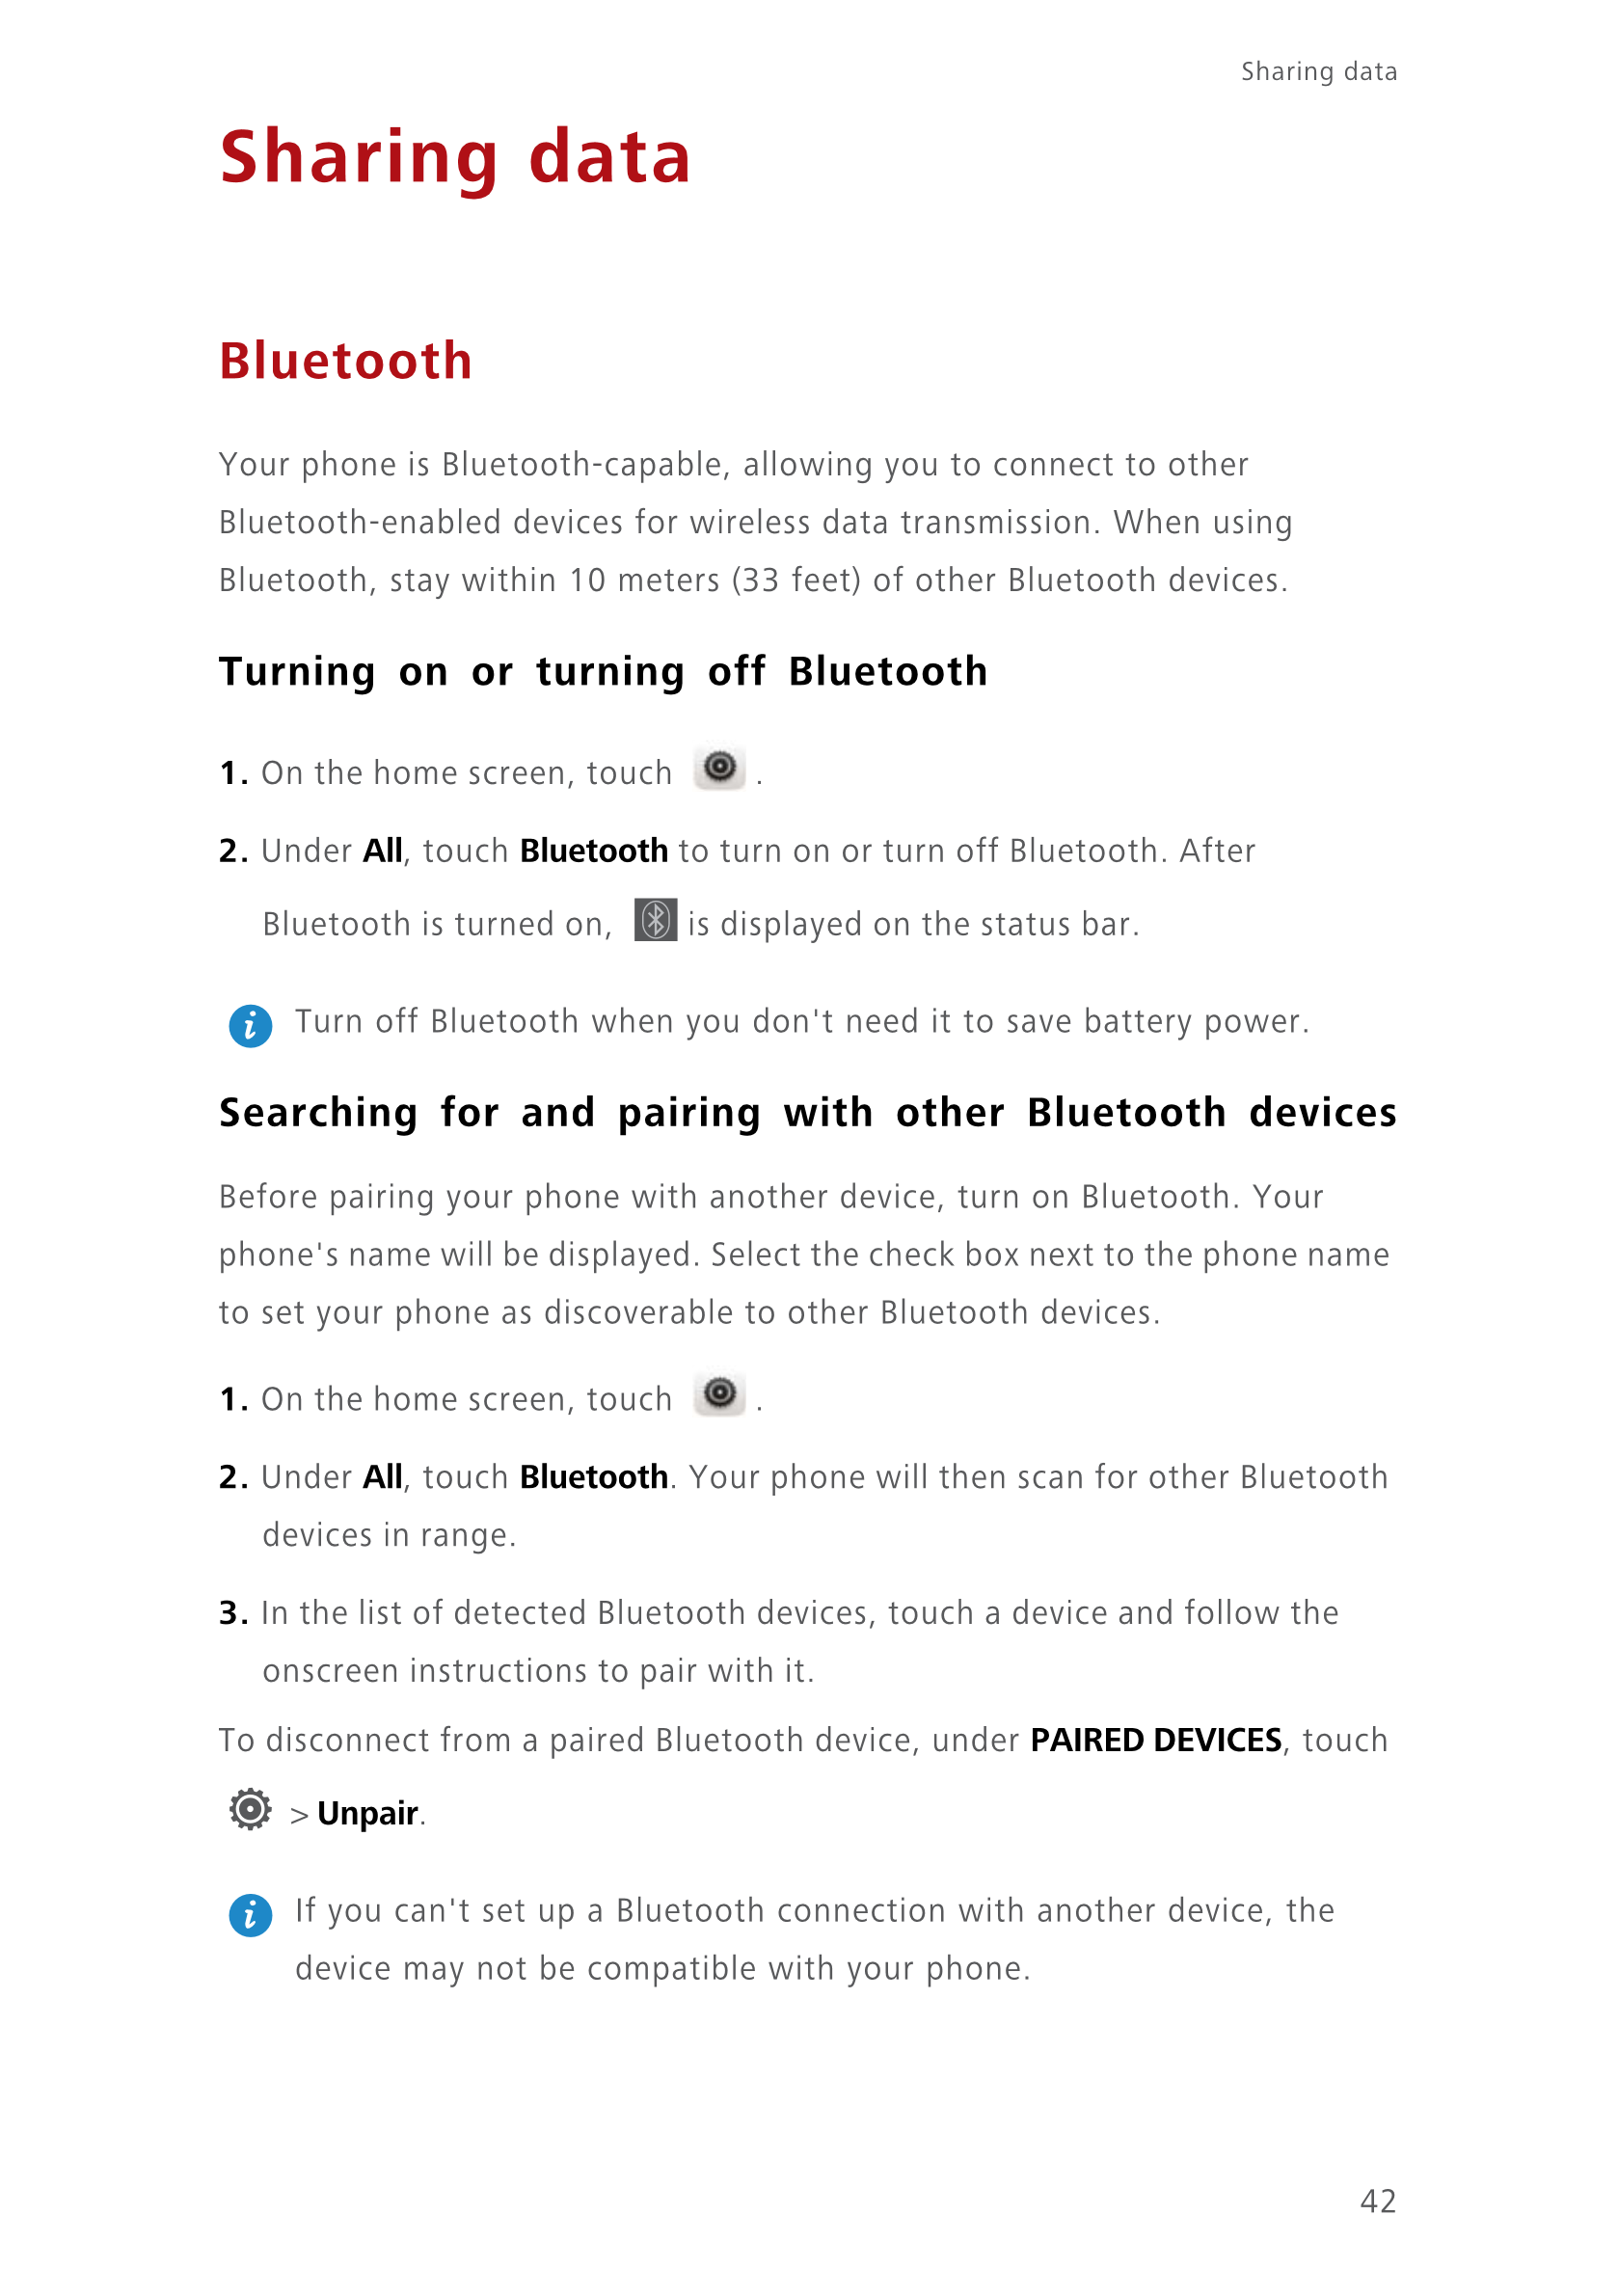 Sharing data 
Sharing data
Bluetooth
Your phone is Bluetooth-capable, allowing you to connect to other 
Bluetooth-enabled device